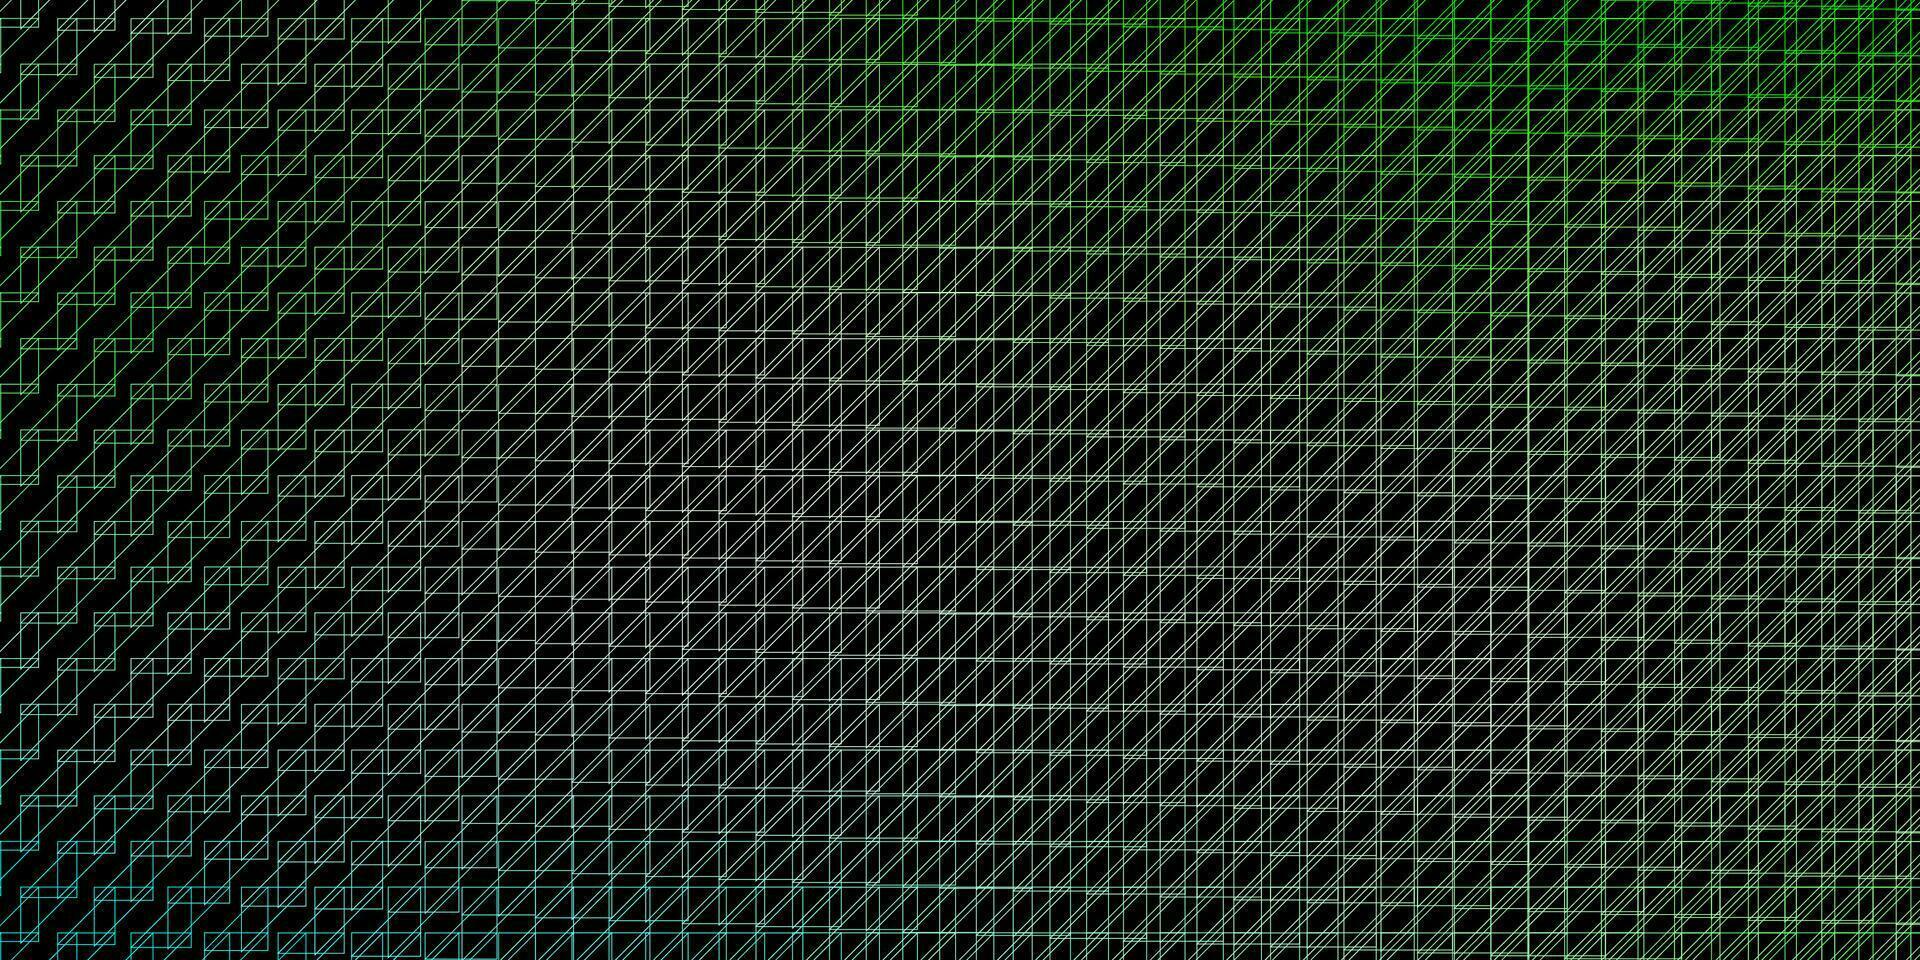 Dark Green vector pattern with lines.